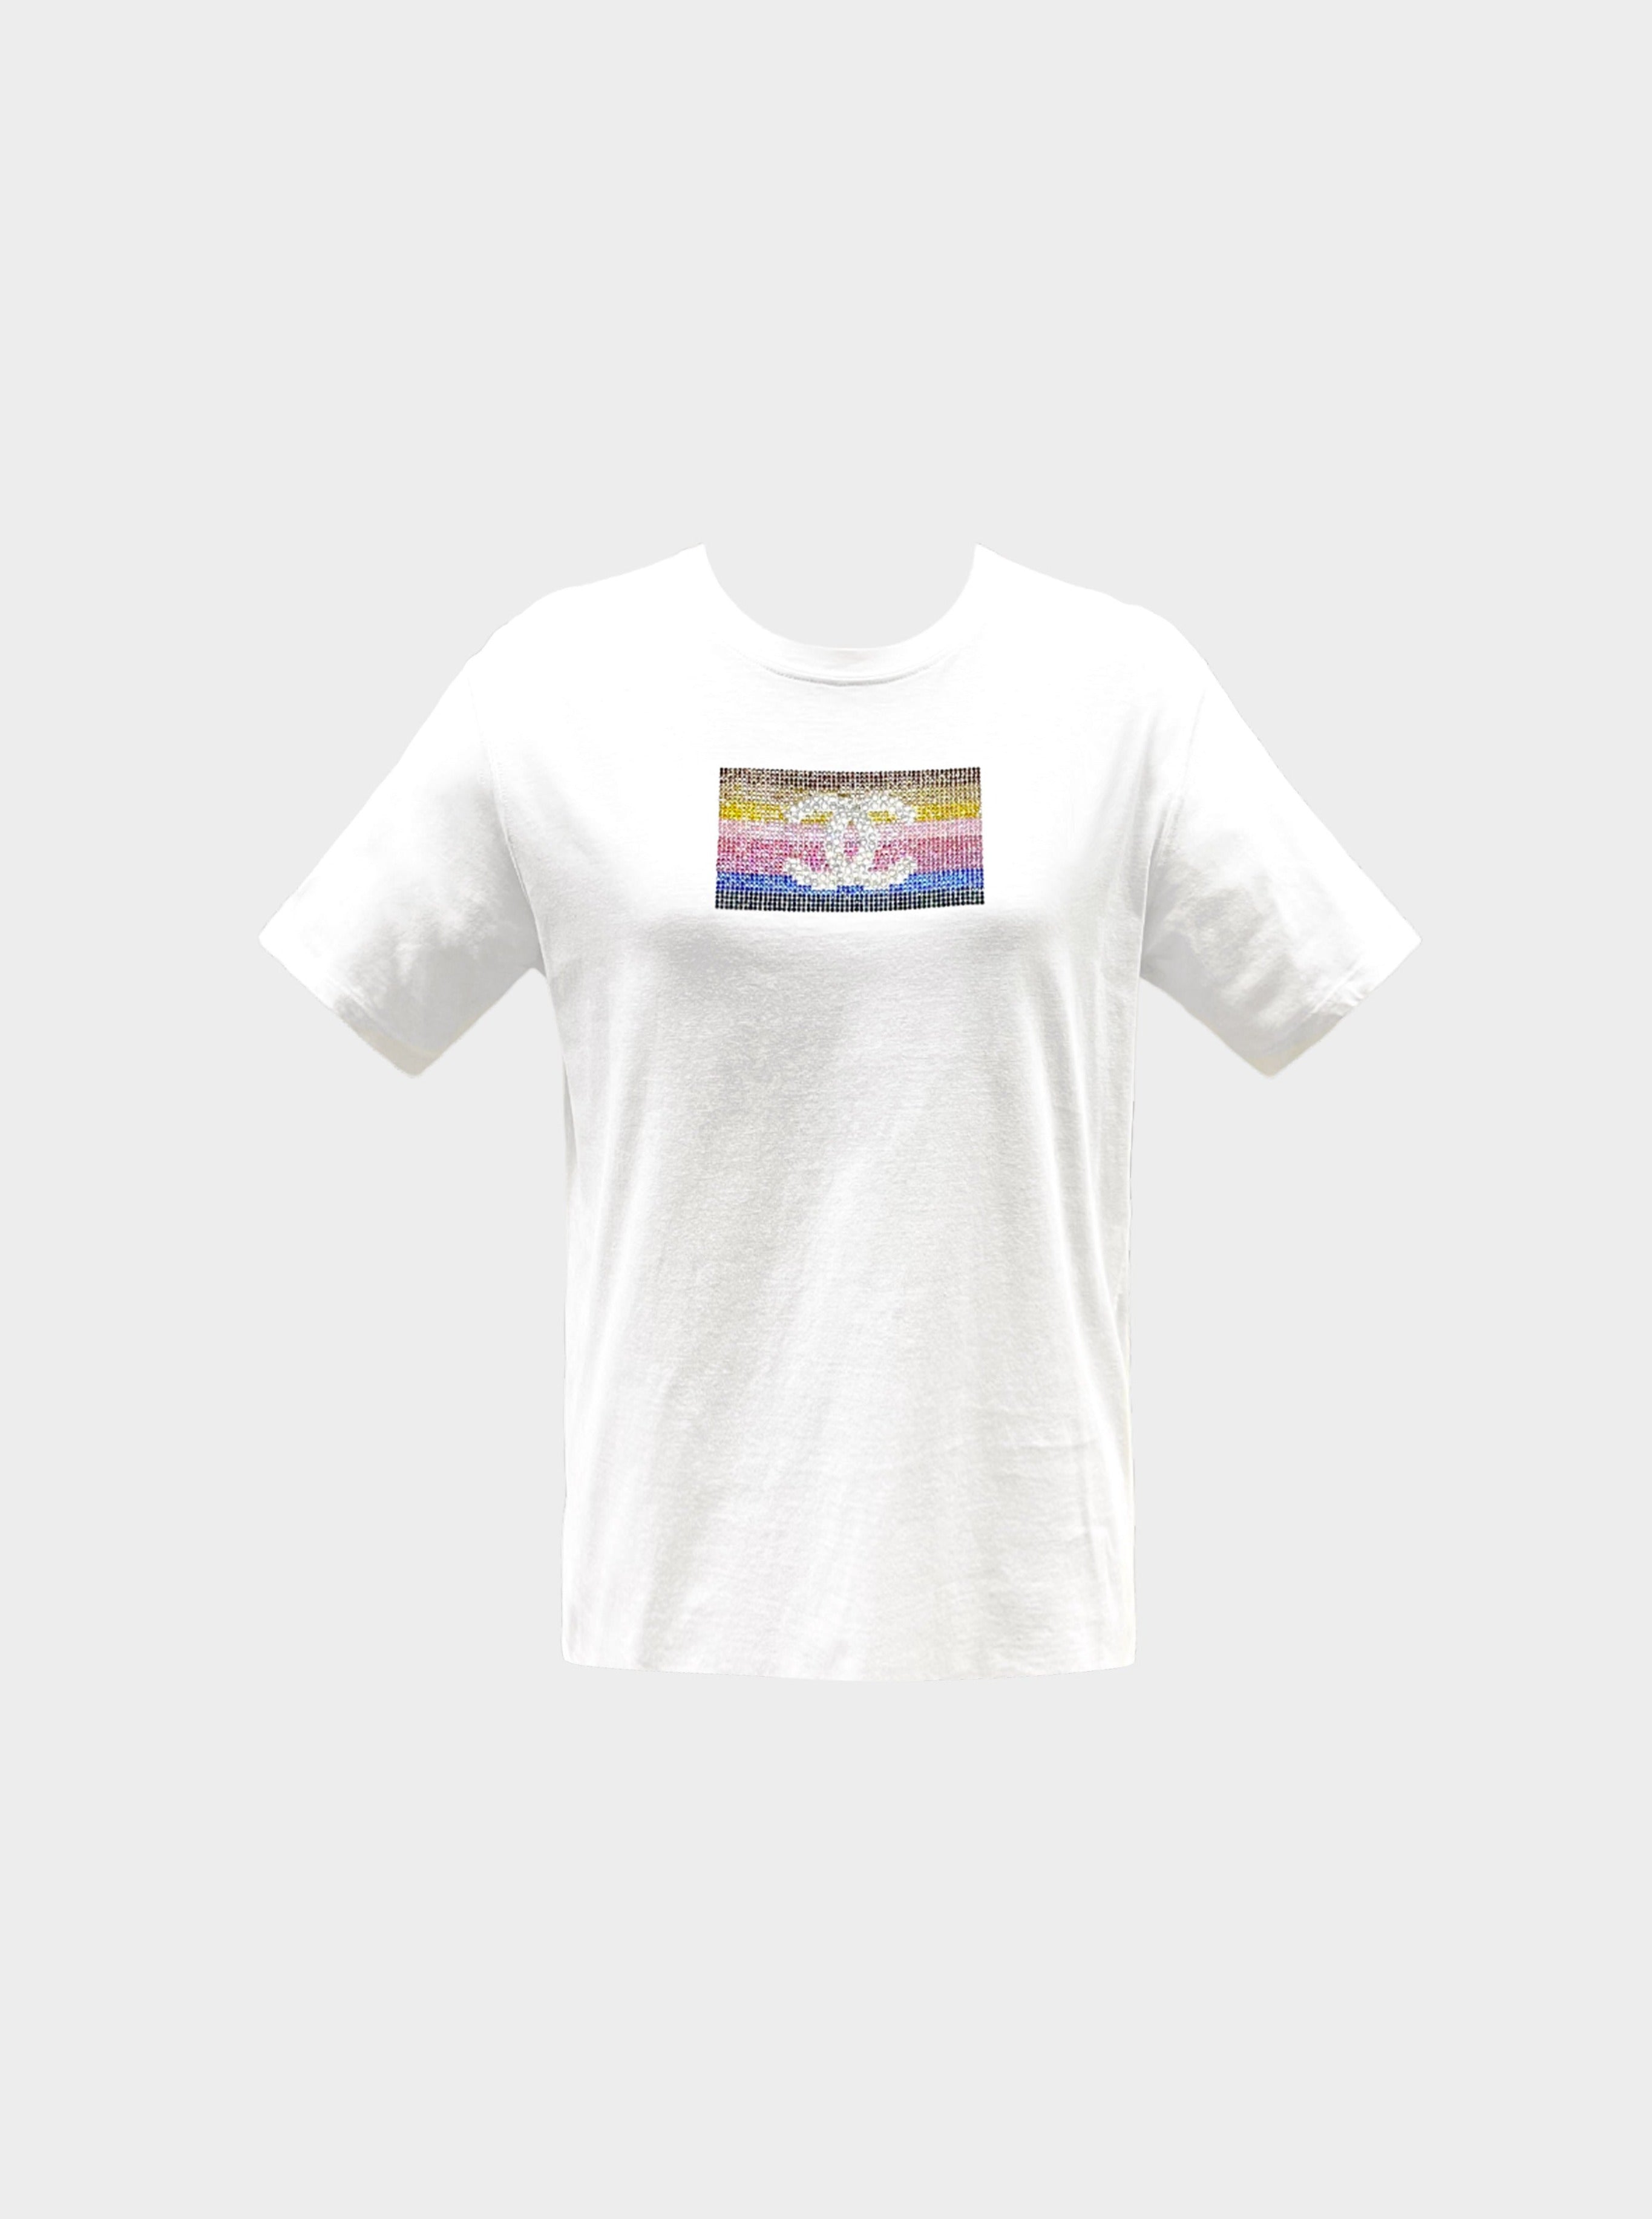 Chanel FW 2005 VIP Multicolor Crystals White Cotton T-Shirt · INTO